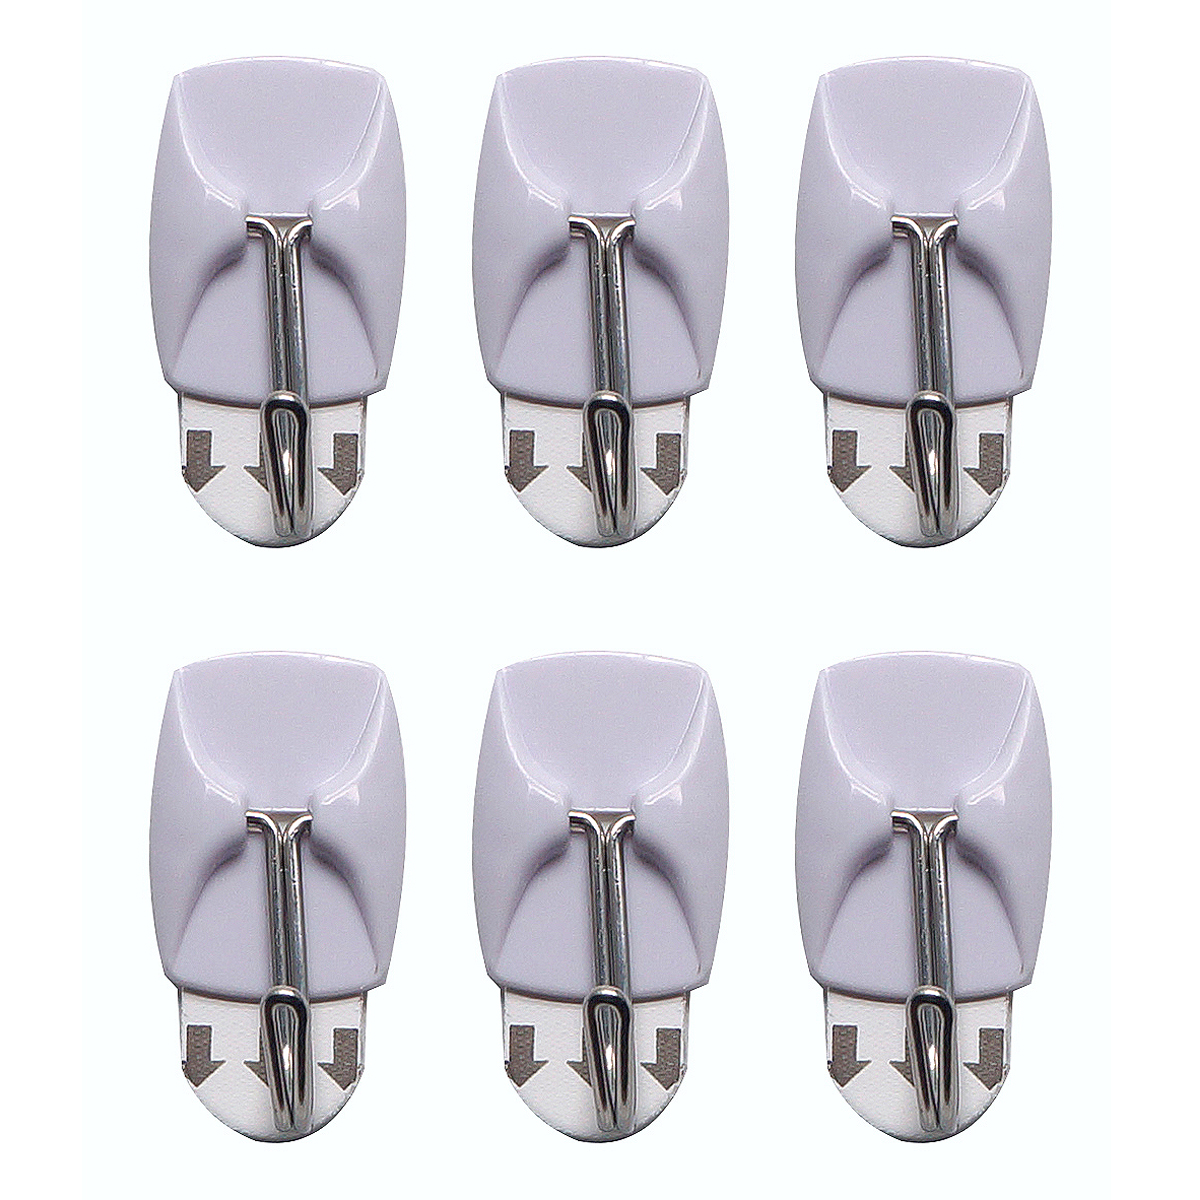 6 Piece small, removable self-adhesive metal hook set